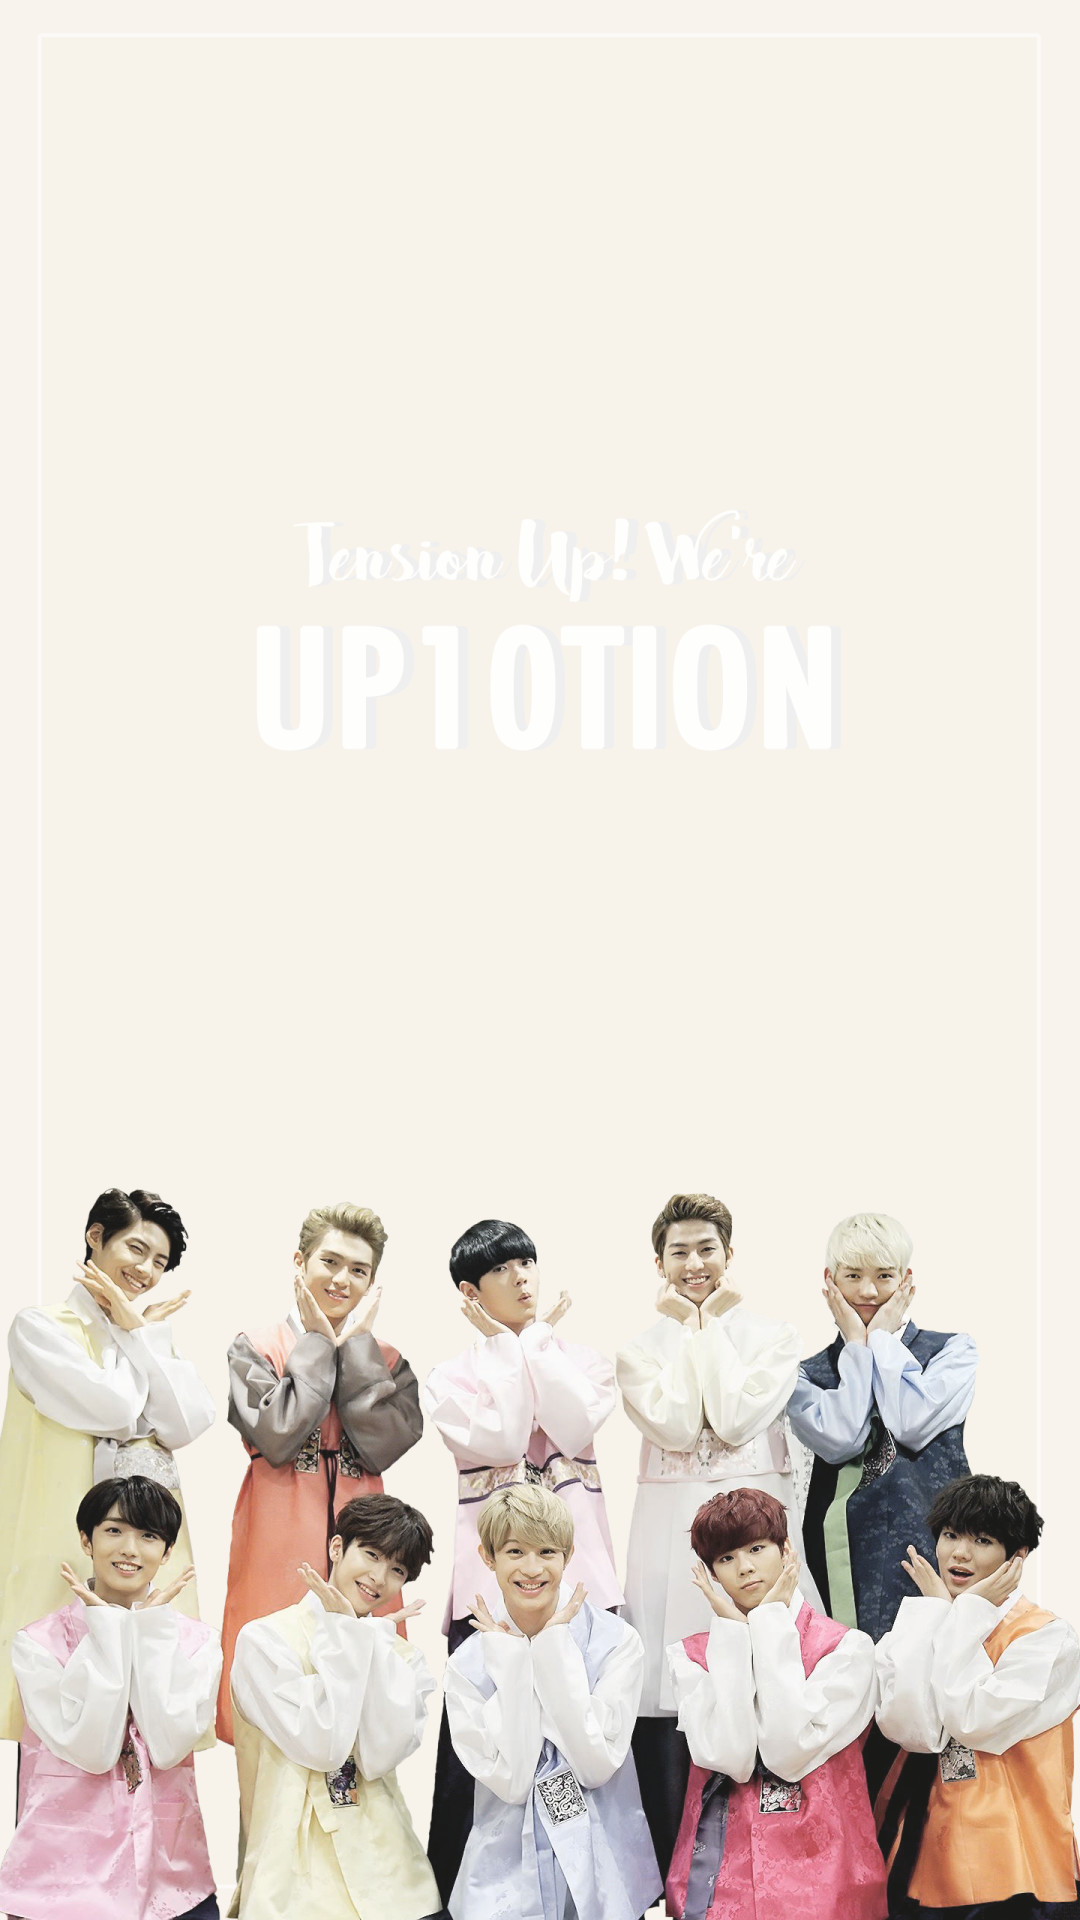 1080x1920 UP10TION wallpaper for phone Â· Wallpaper For PhoneIphone WallpapersKpop ...